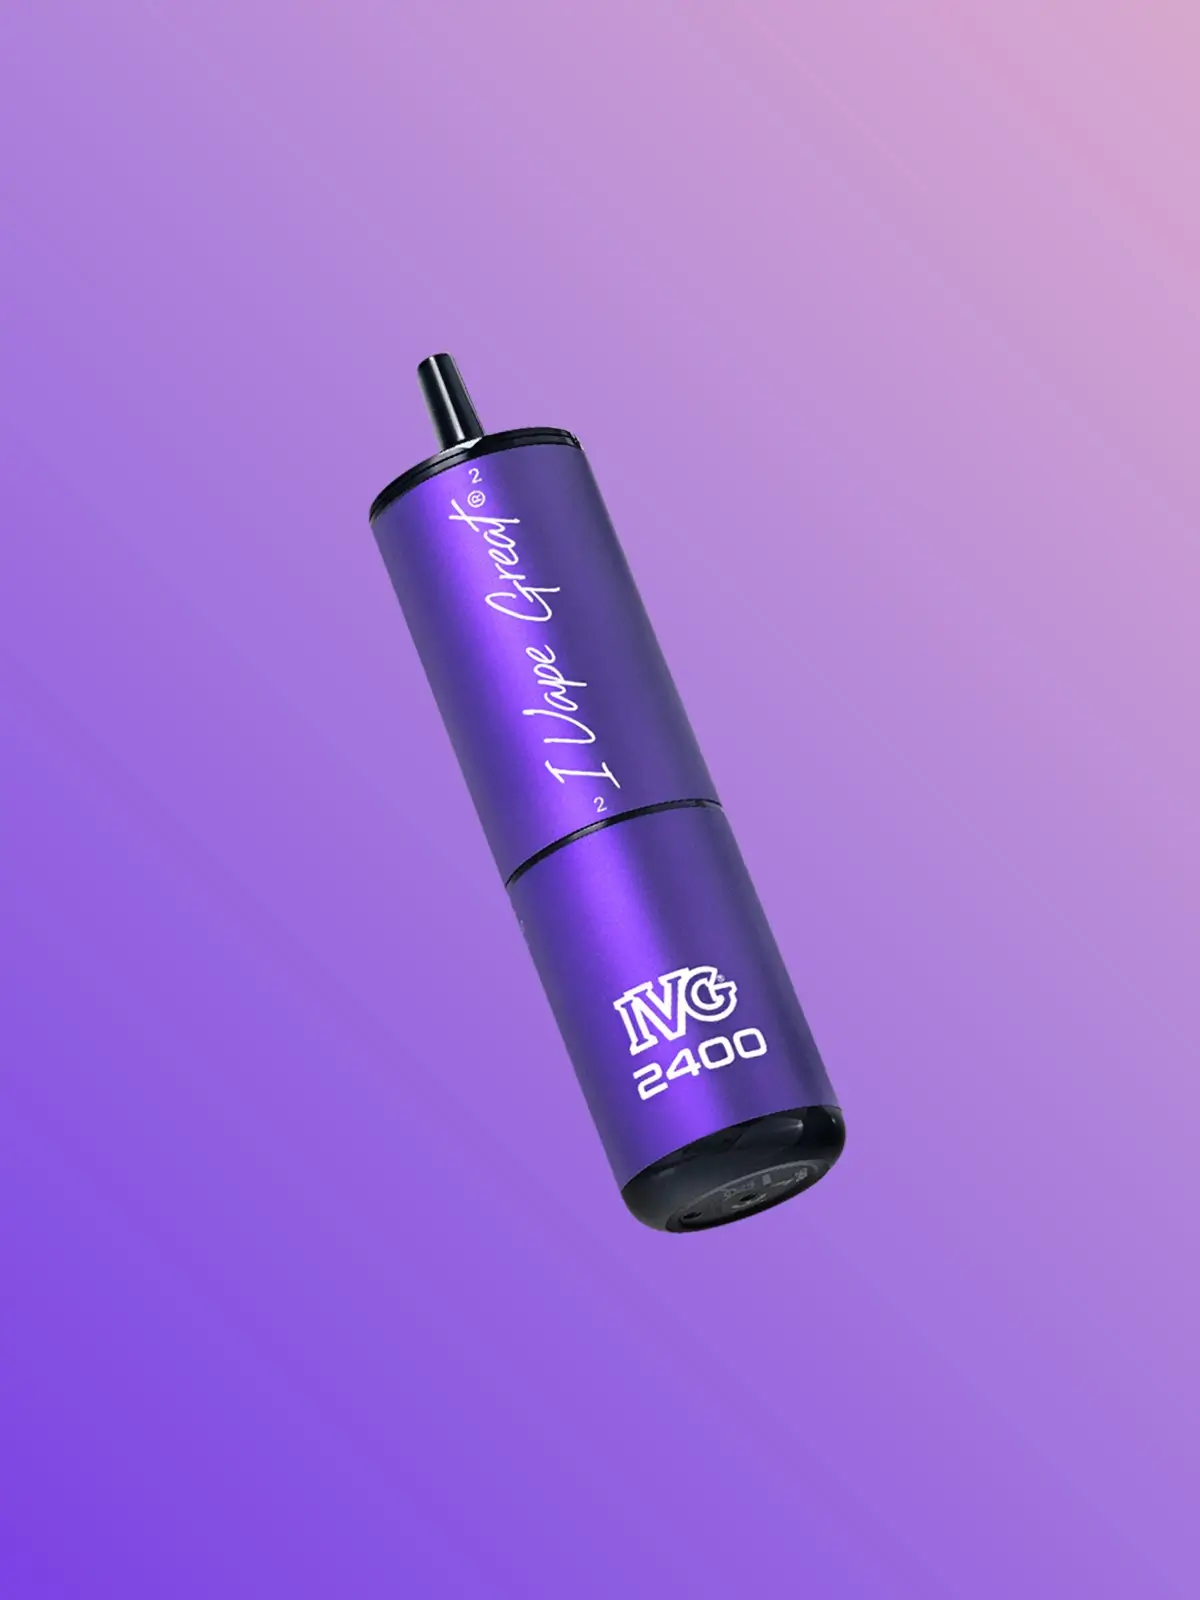 A Purple Edition IVG 2400 disposable vape floating in front of a purple background.